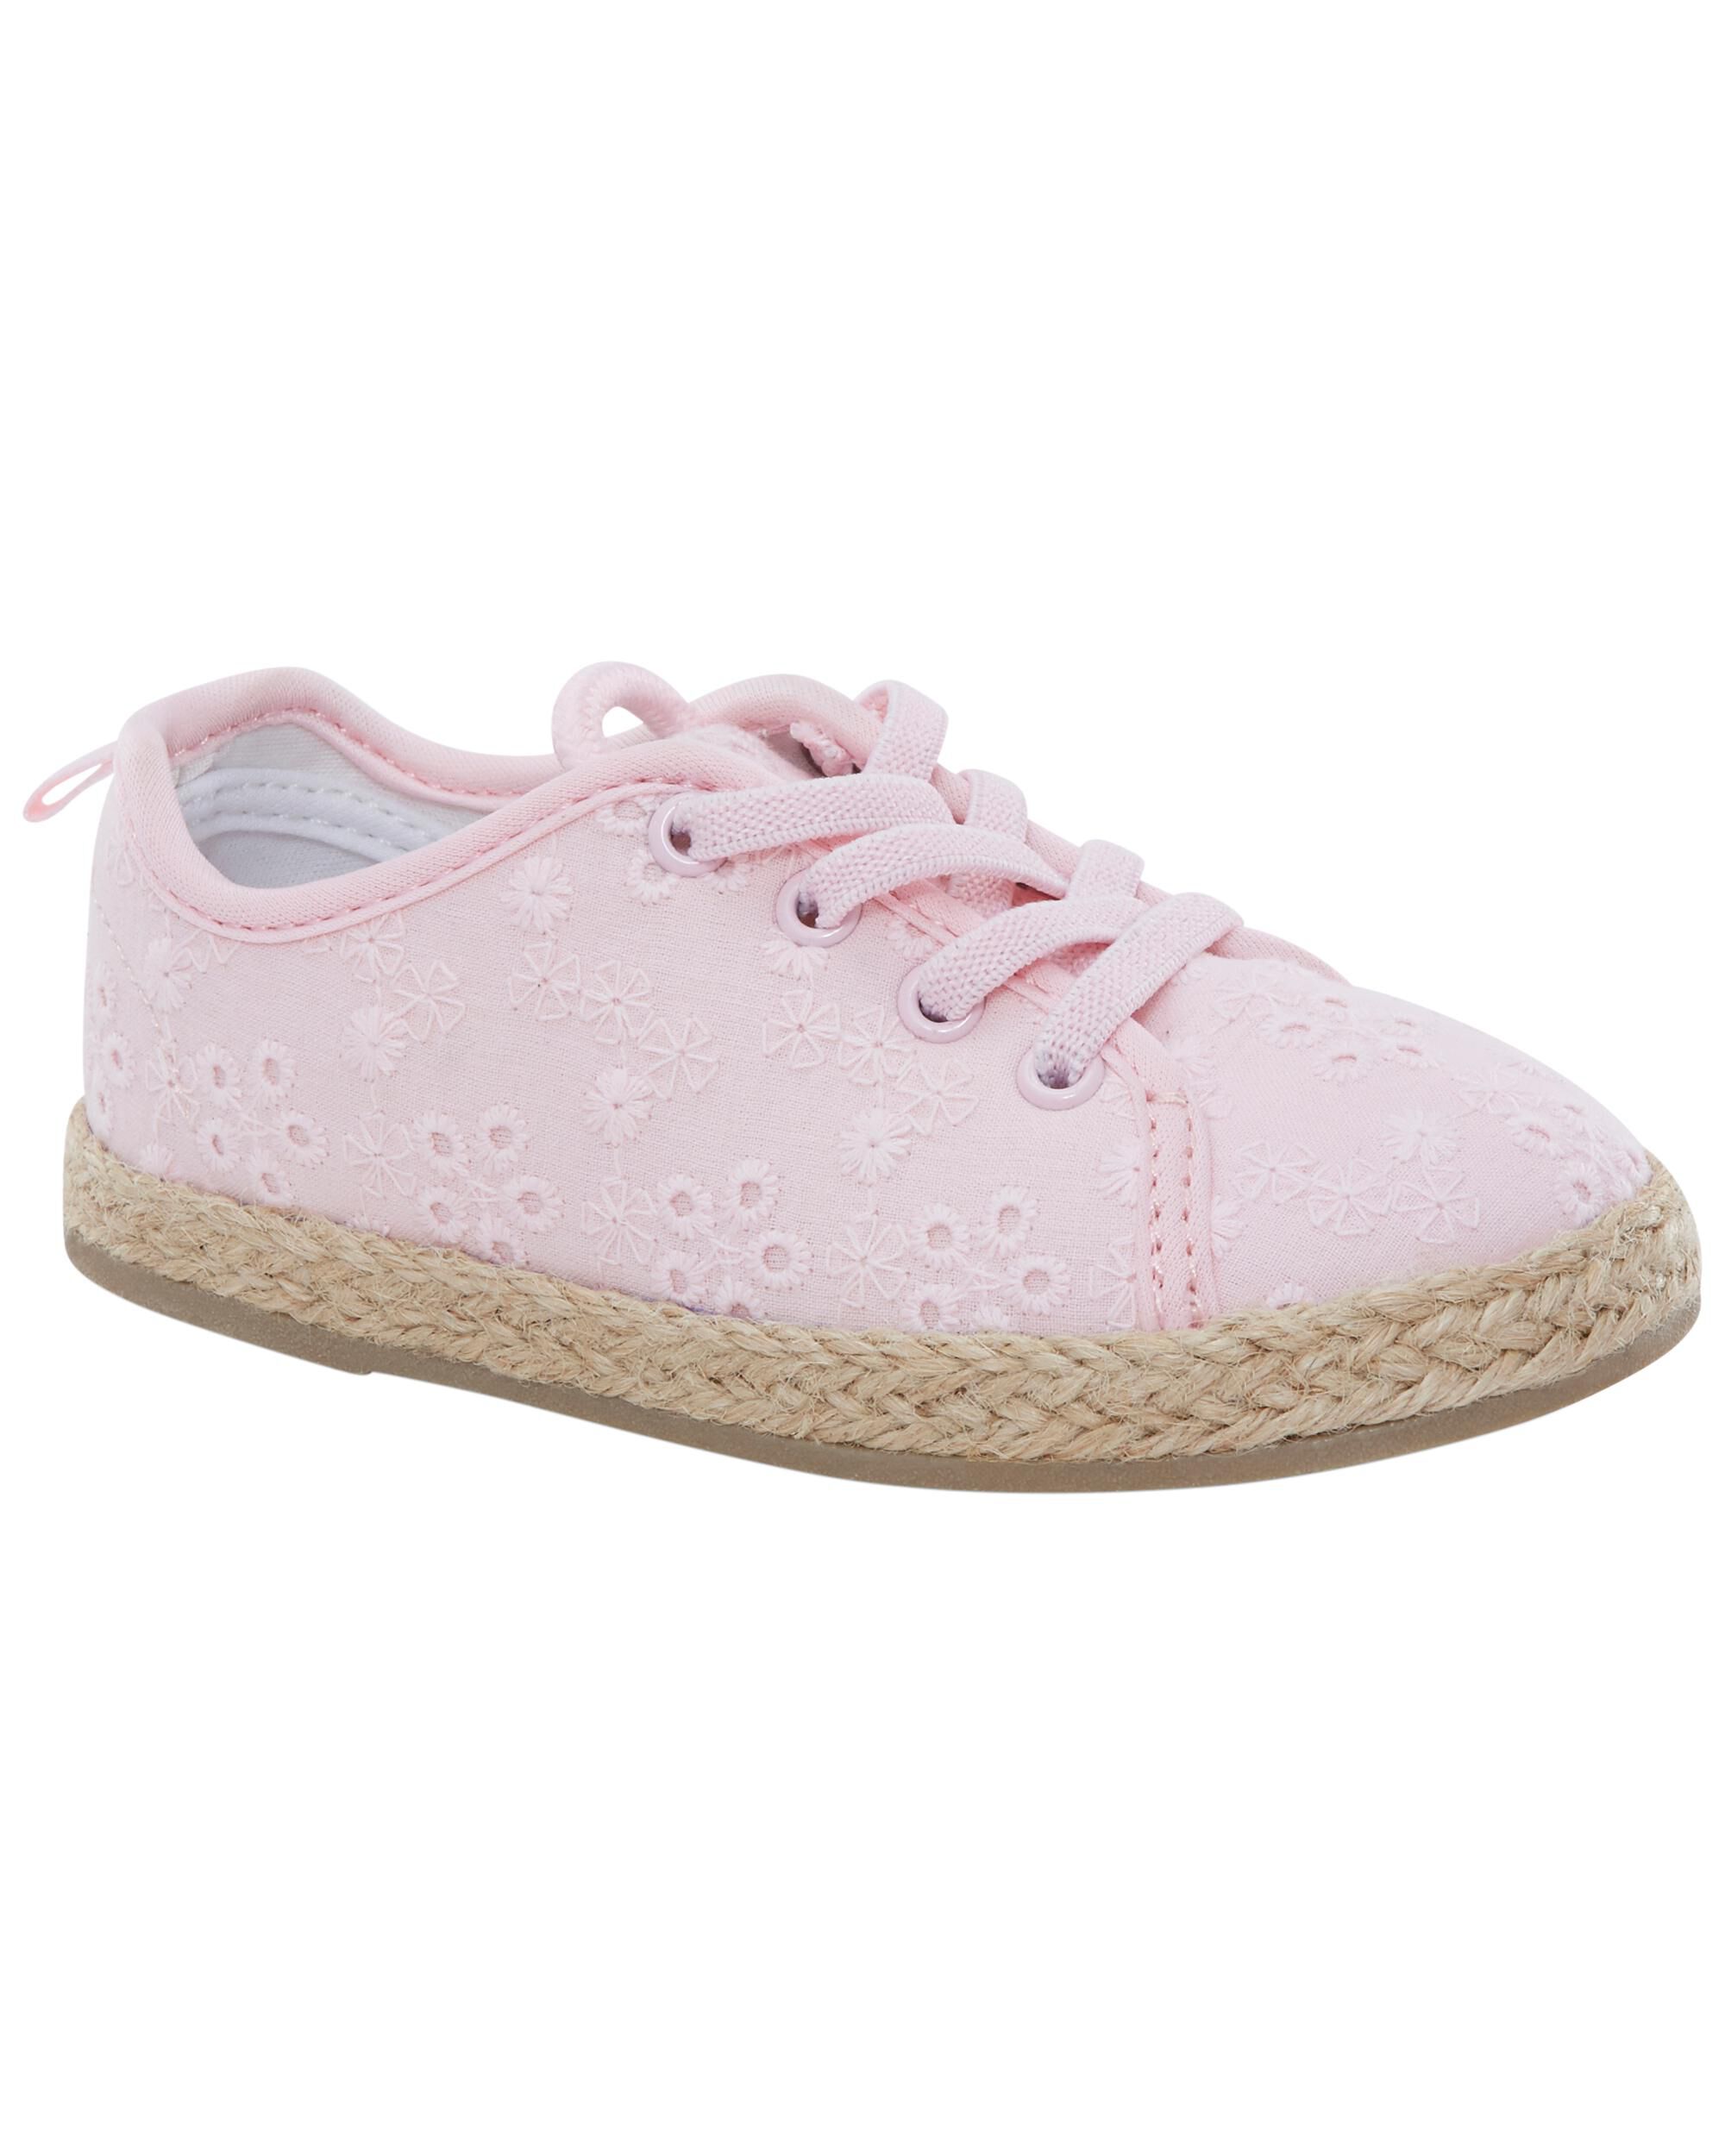 Carter's Toddler Girl's Austine Pink Cat Sneakers Shoes 